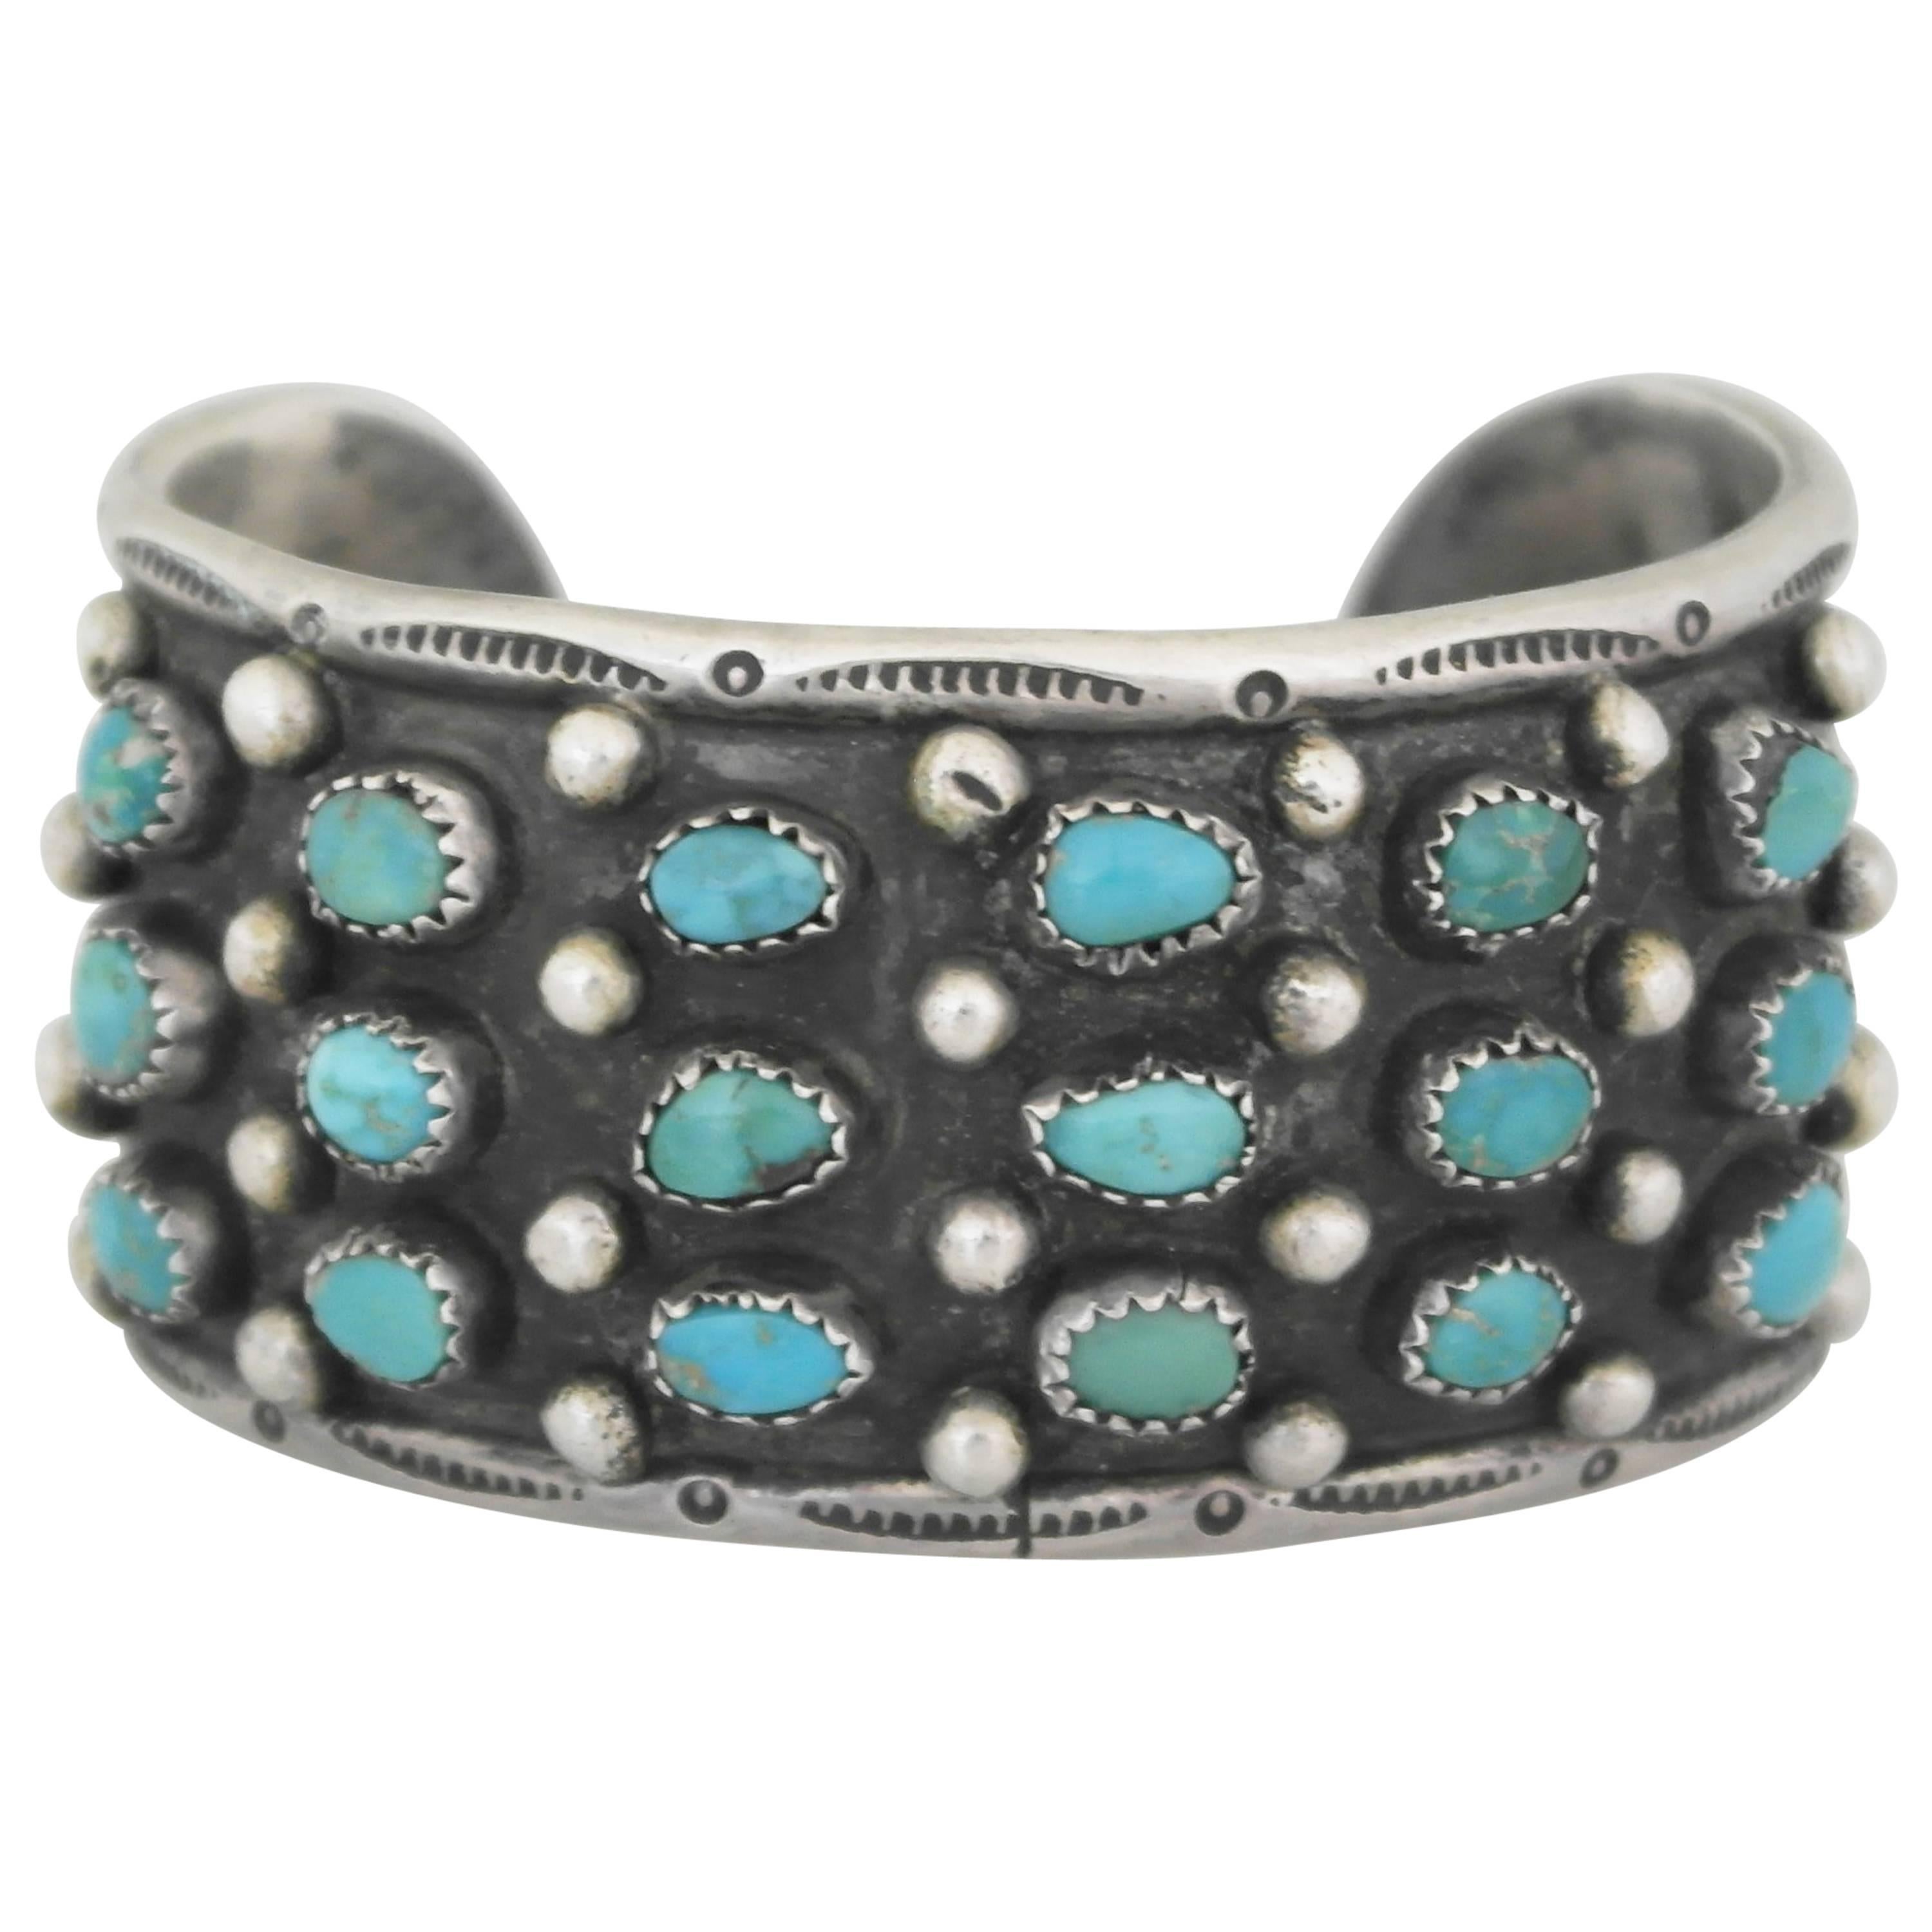 Roger Skeets Native American Turquoise Sterling Silver Cuff Bracelet